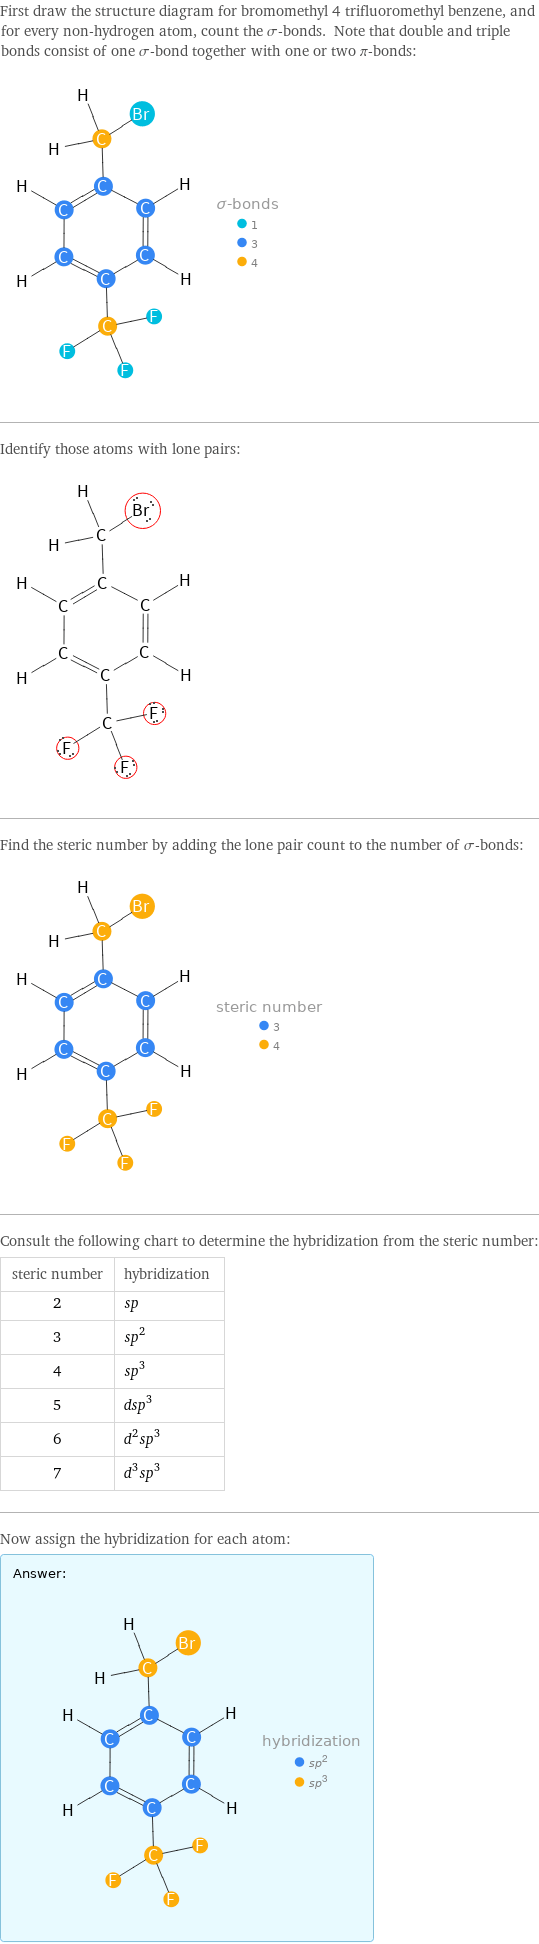 First draw the structure diagram for bromomethyl 4 trifluoromethyl benzene, and for every non-hydrogen atom, count the σ-bonds. Note that double and triple bonds consist of one σ-bond together with one or two π-bonds:  Identify those atoms with lone pairs:  Find the steric number by adding the lone pair count to the number of σ-bonds:  Consult the following chart to determine the hybridization from the steric number: steric number | hybridization 2 | sp 3 | sp^2 4 | sp^3 5 | dsp^3 6 | d^2sp^3 7 | d^3sp^3 Now assign the hybridization for each atom: Answer: |   | 